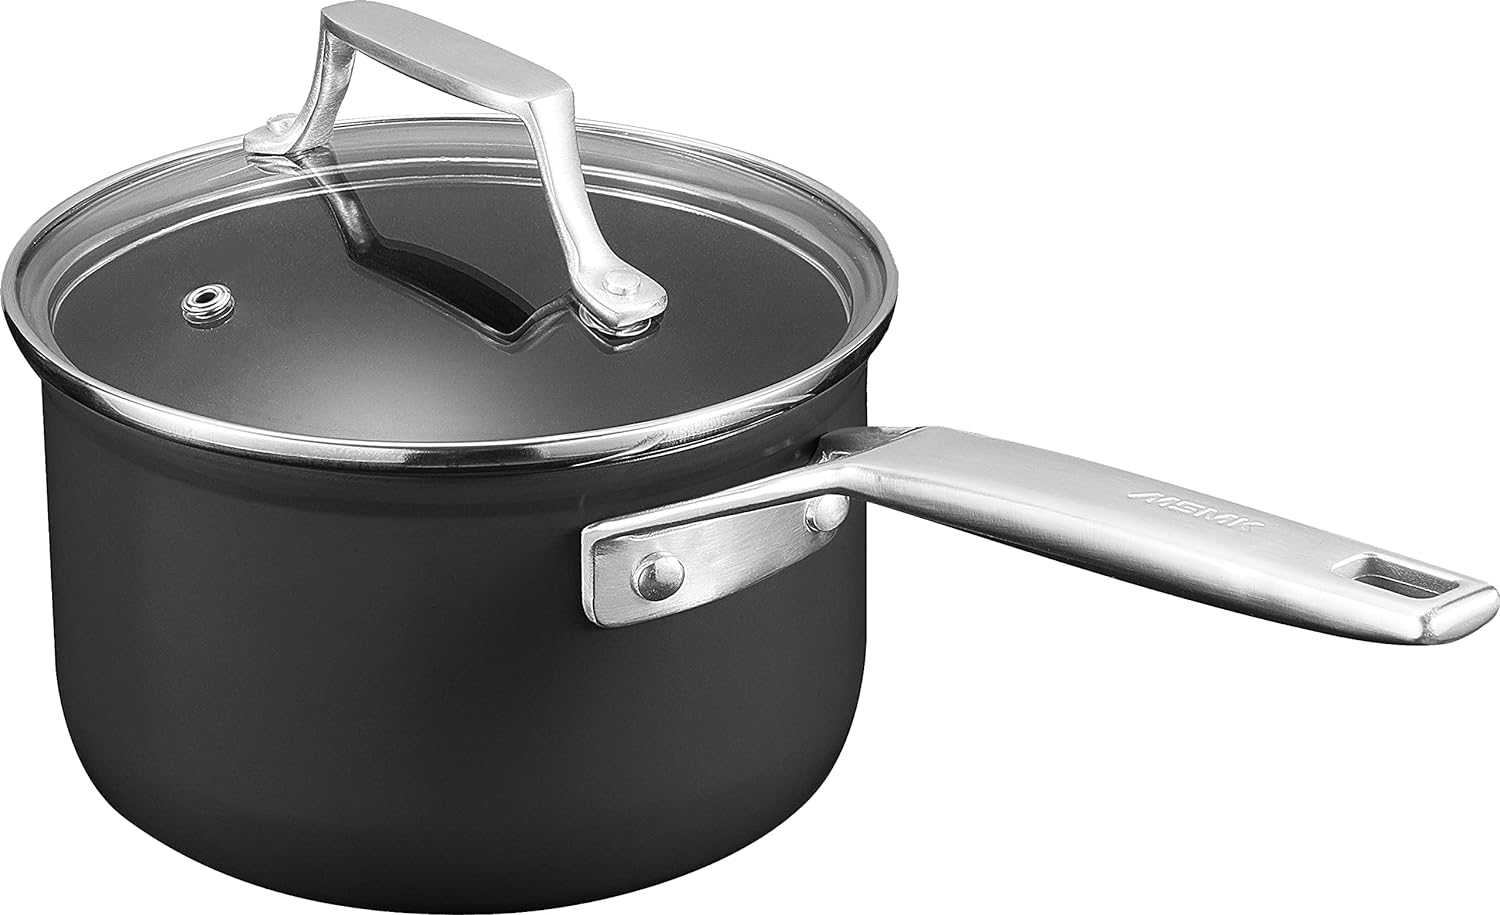 They work fantastic they heat, evenly they clean up very nice. Theyre definitely my go to pots and pans. handle gets a little warm at times but nothing that would ever keep me from ordering this product again I recommend.